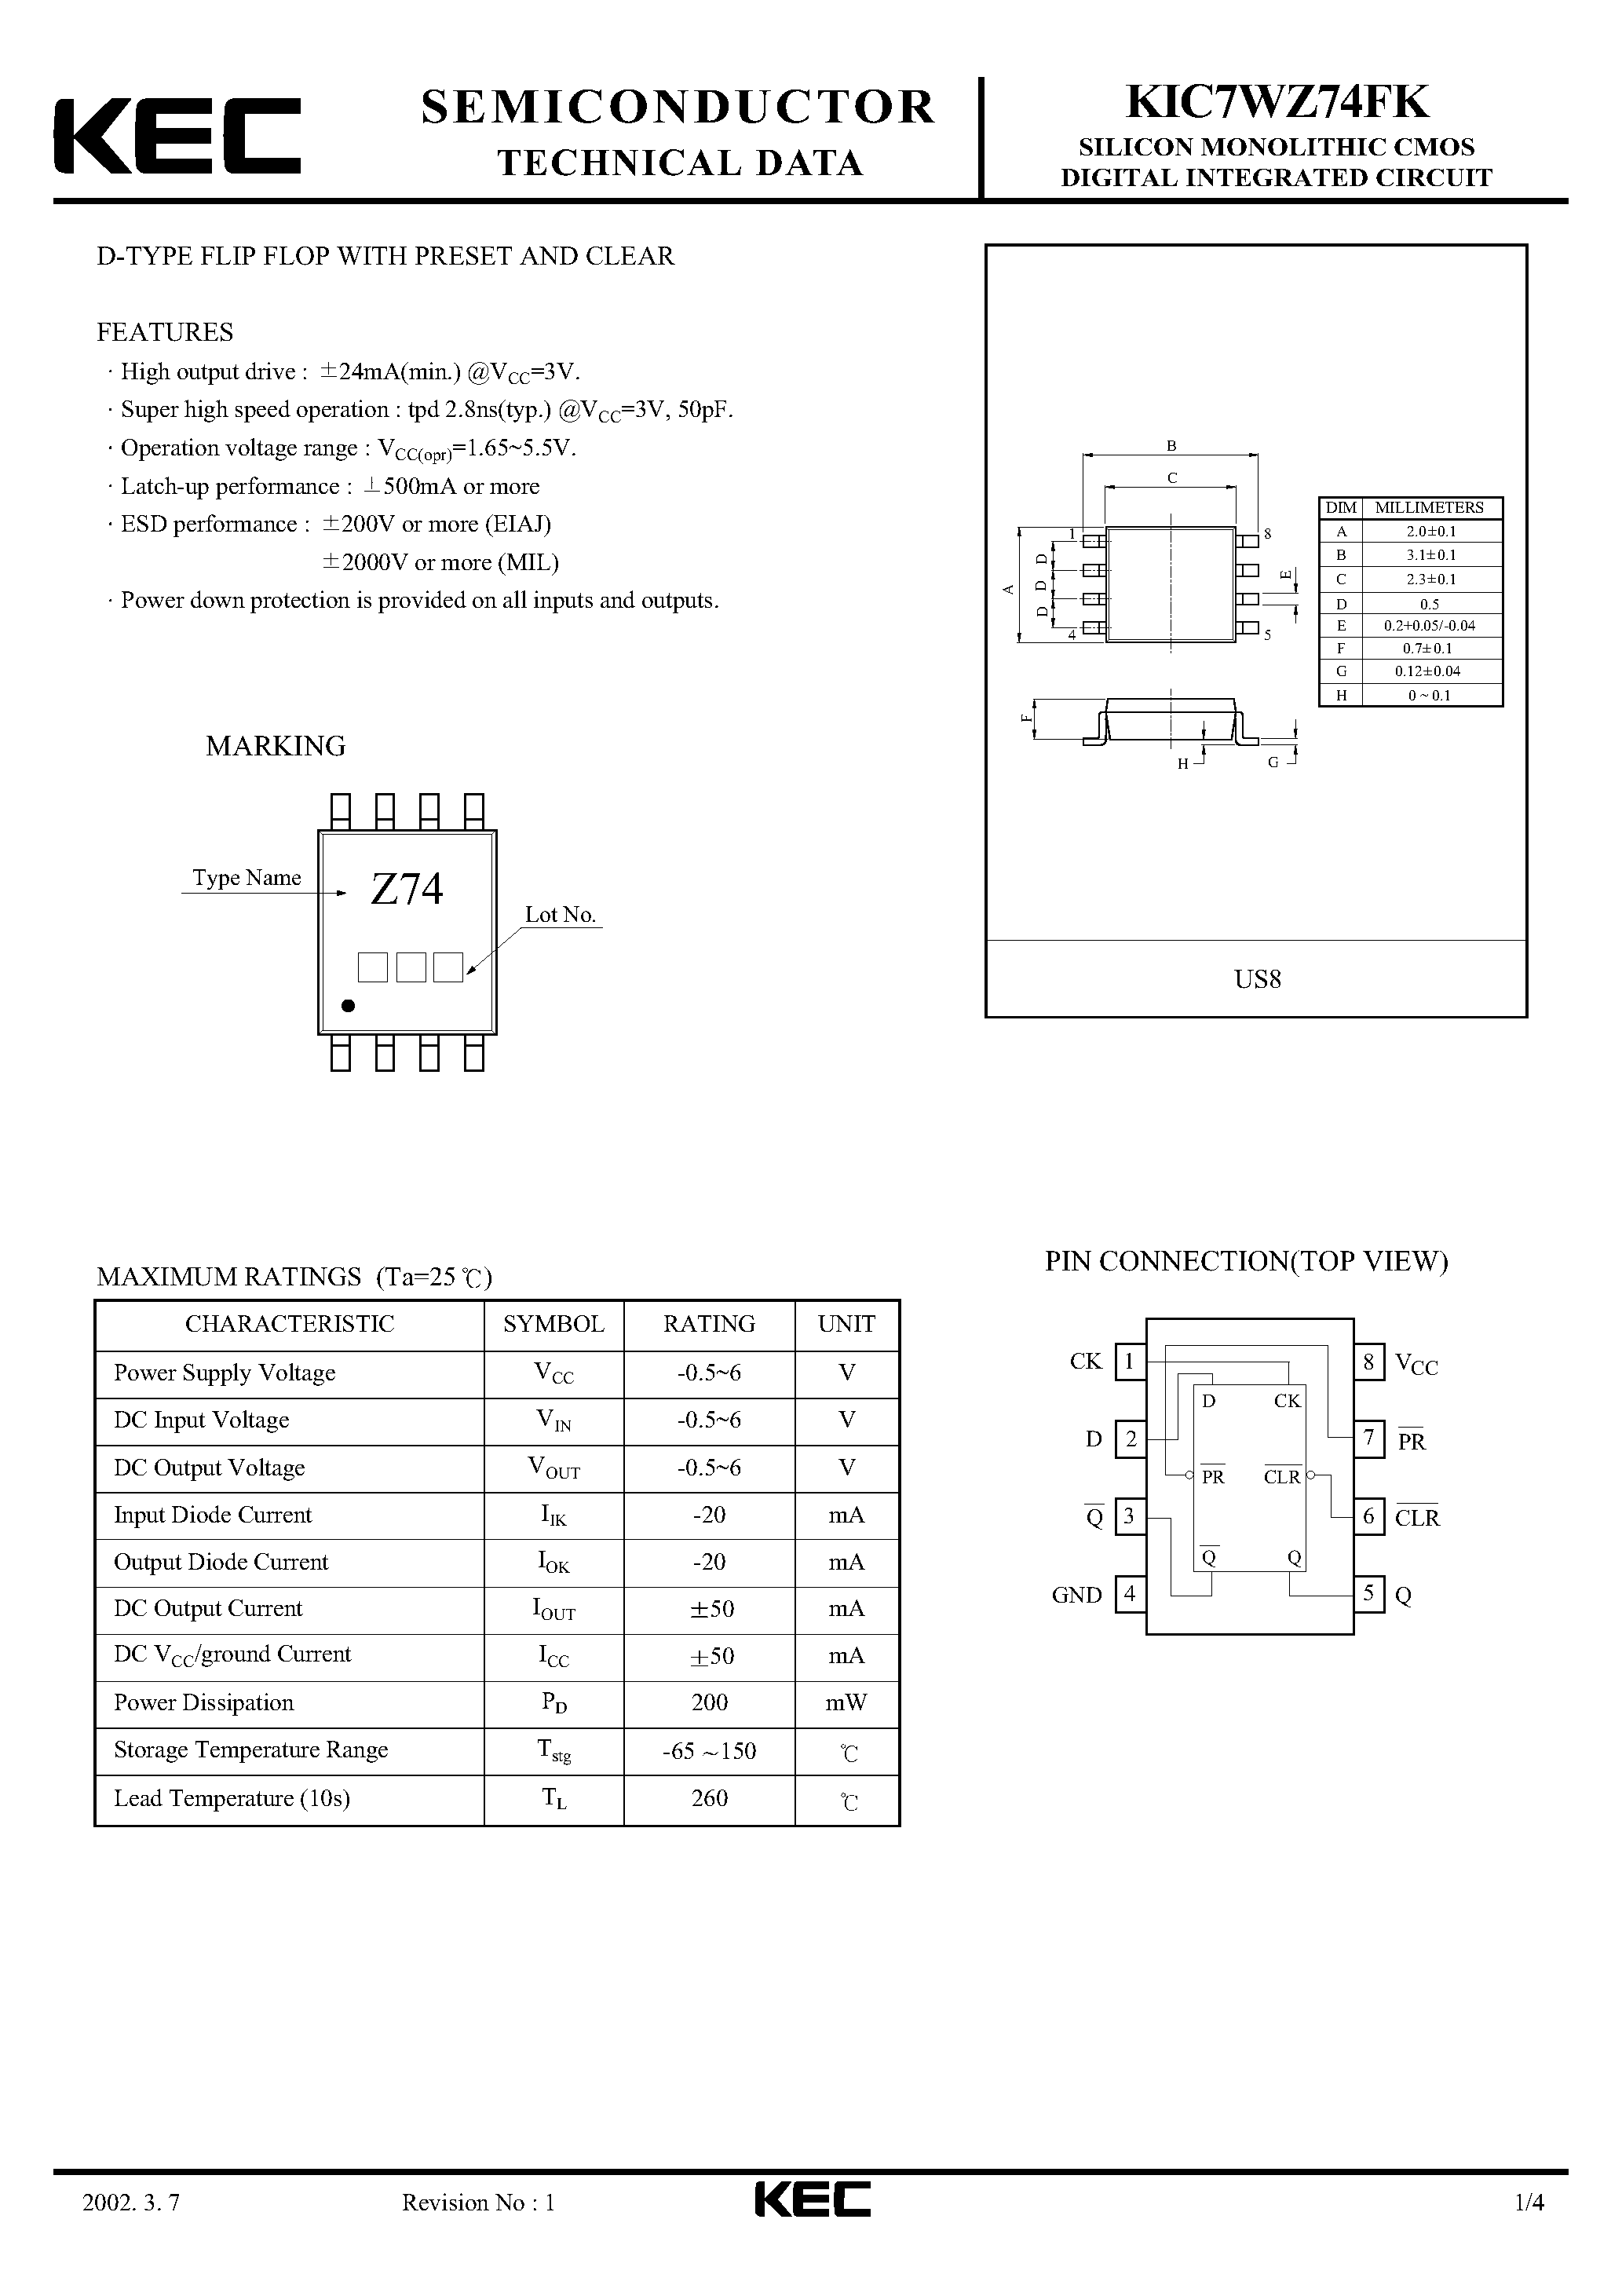 Datasheet KIC7WZ74FK - SILICON MONOLITHIC CMOS DIGITAL INTEGRATED CIRCUIT(D-TYPE FLIP FLOP WITH PRESET AND CLEAR) page 1